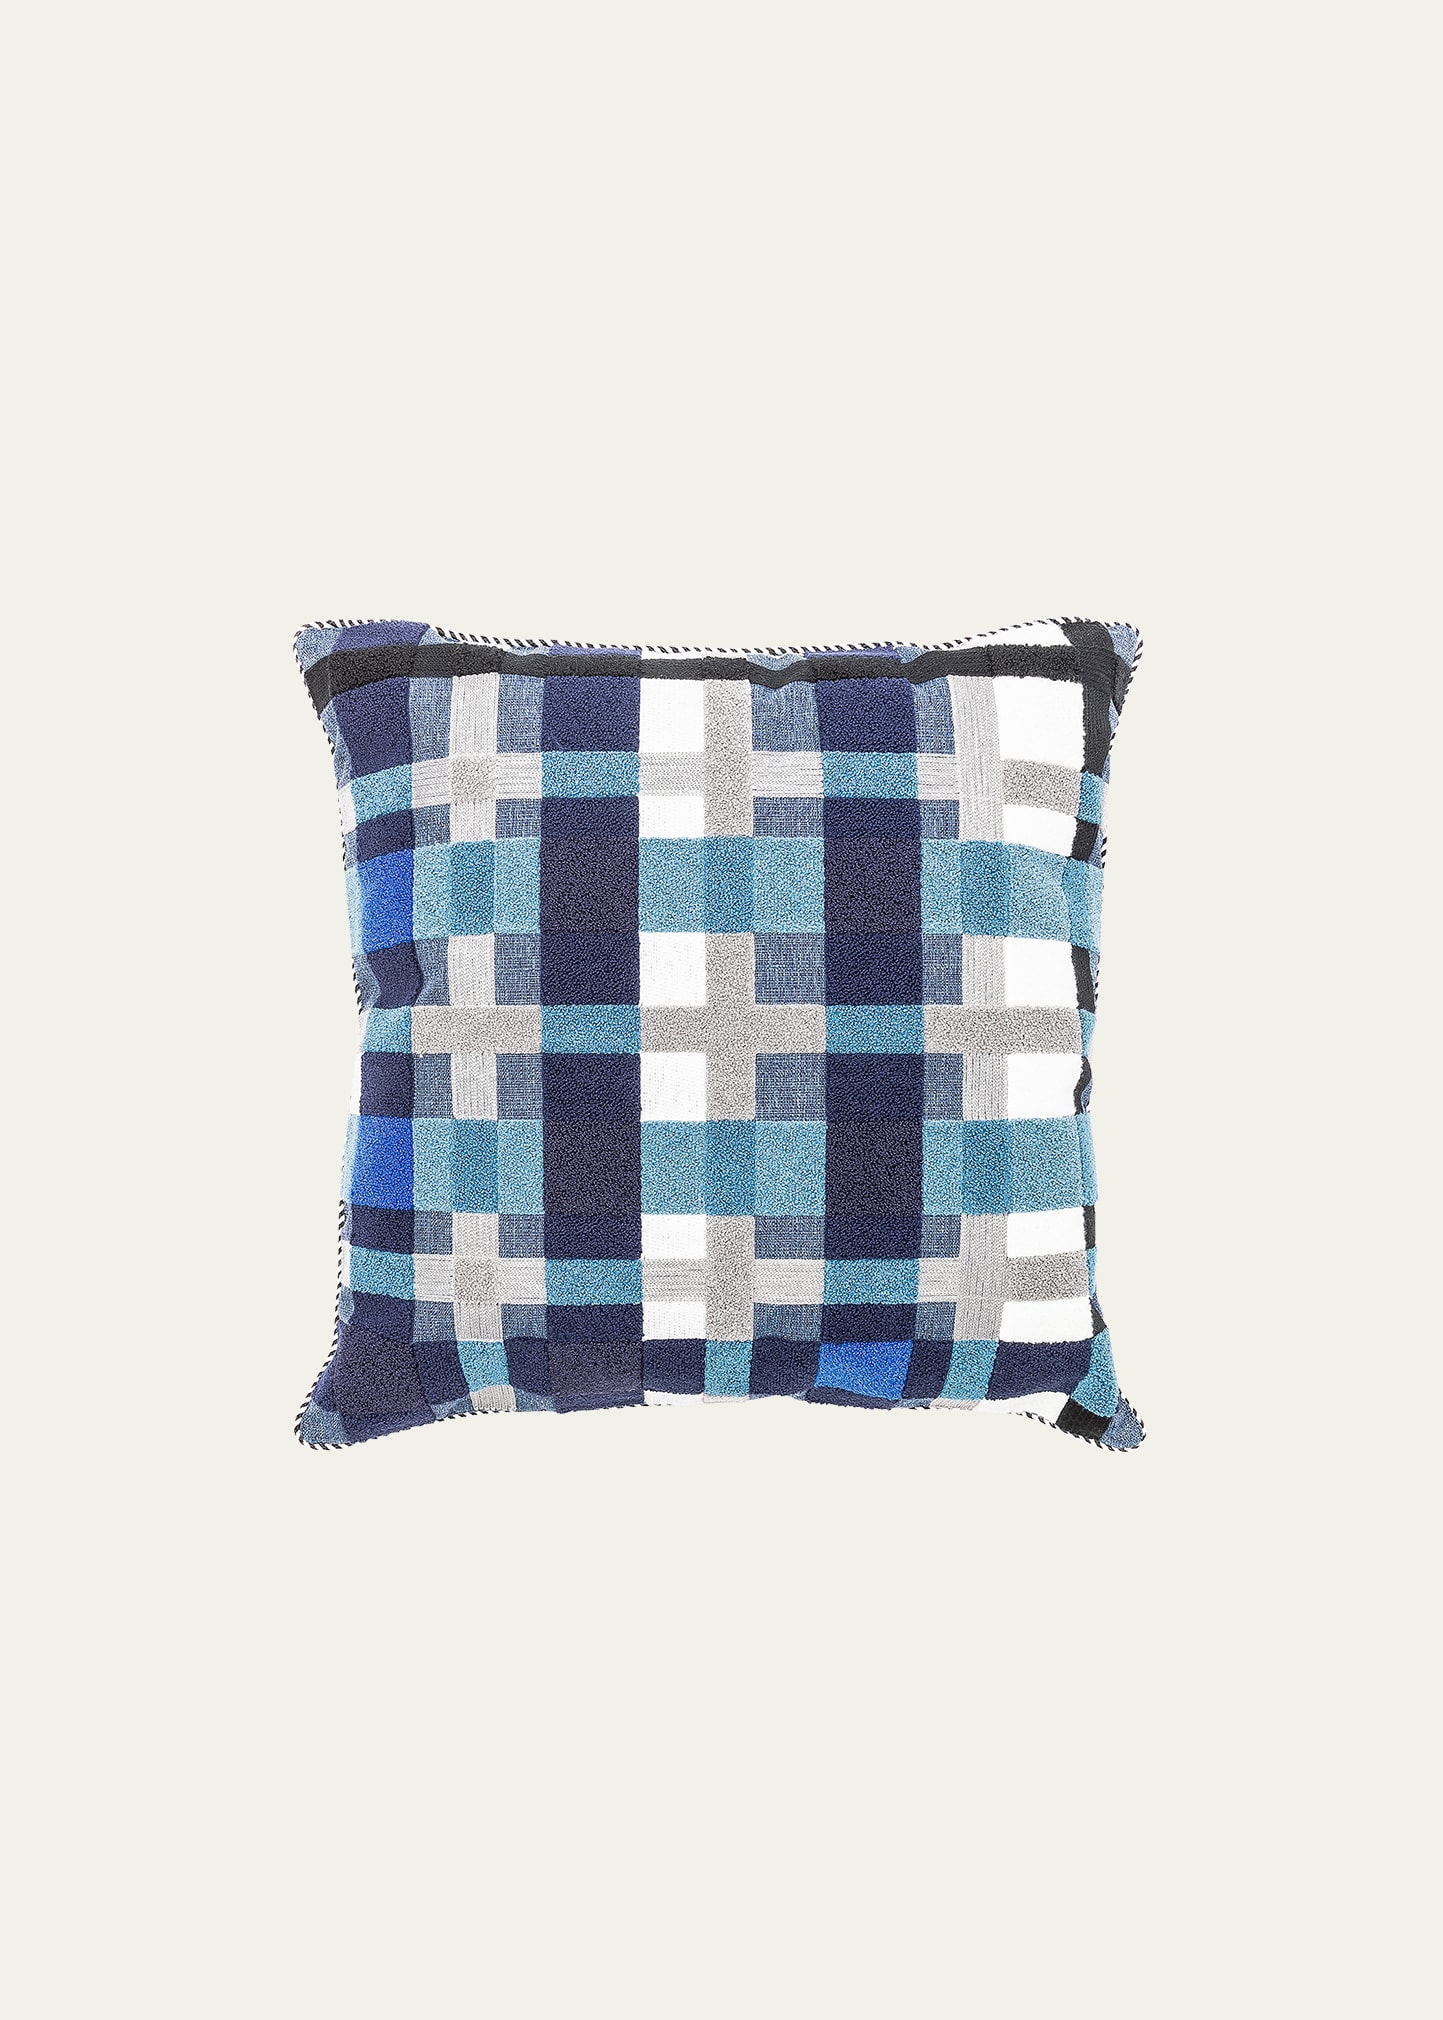 Mackenzie-childs Boathouse Plaid Outdoor Pillow In Multi